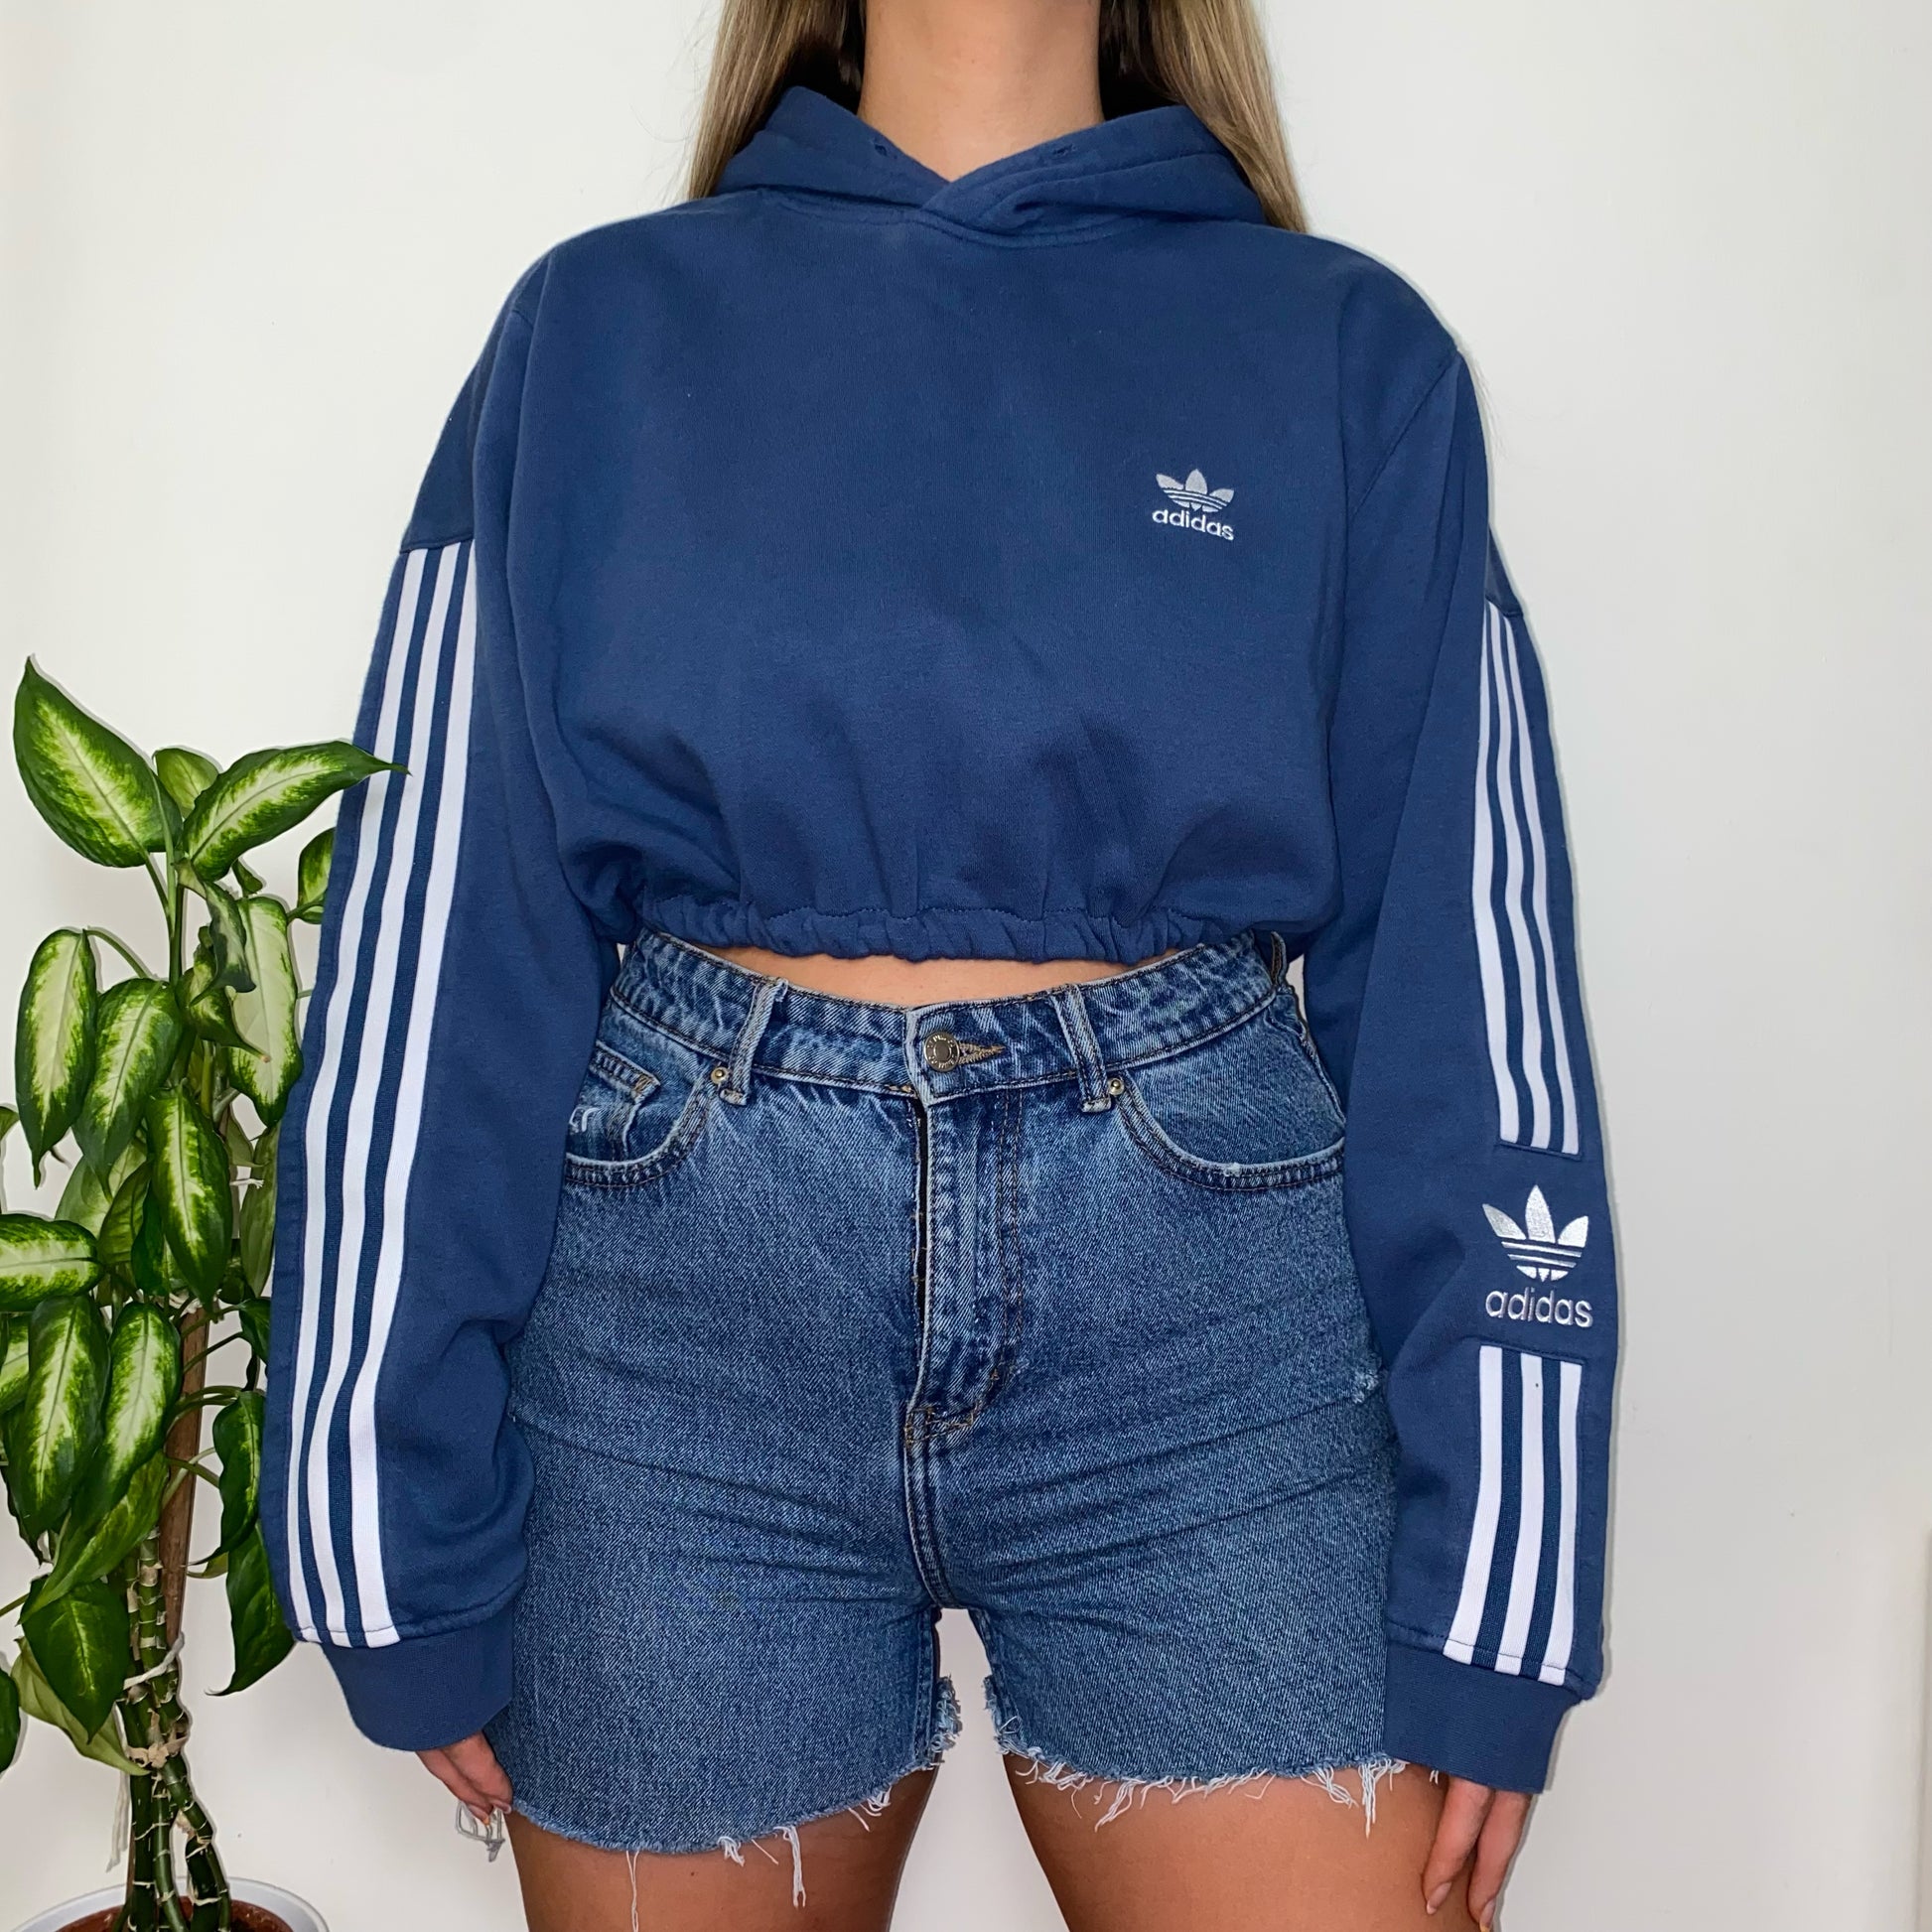 blue cropped hoodie with white adidas logo on chest and sleeves shown on a model wearing blue denim shorts